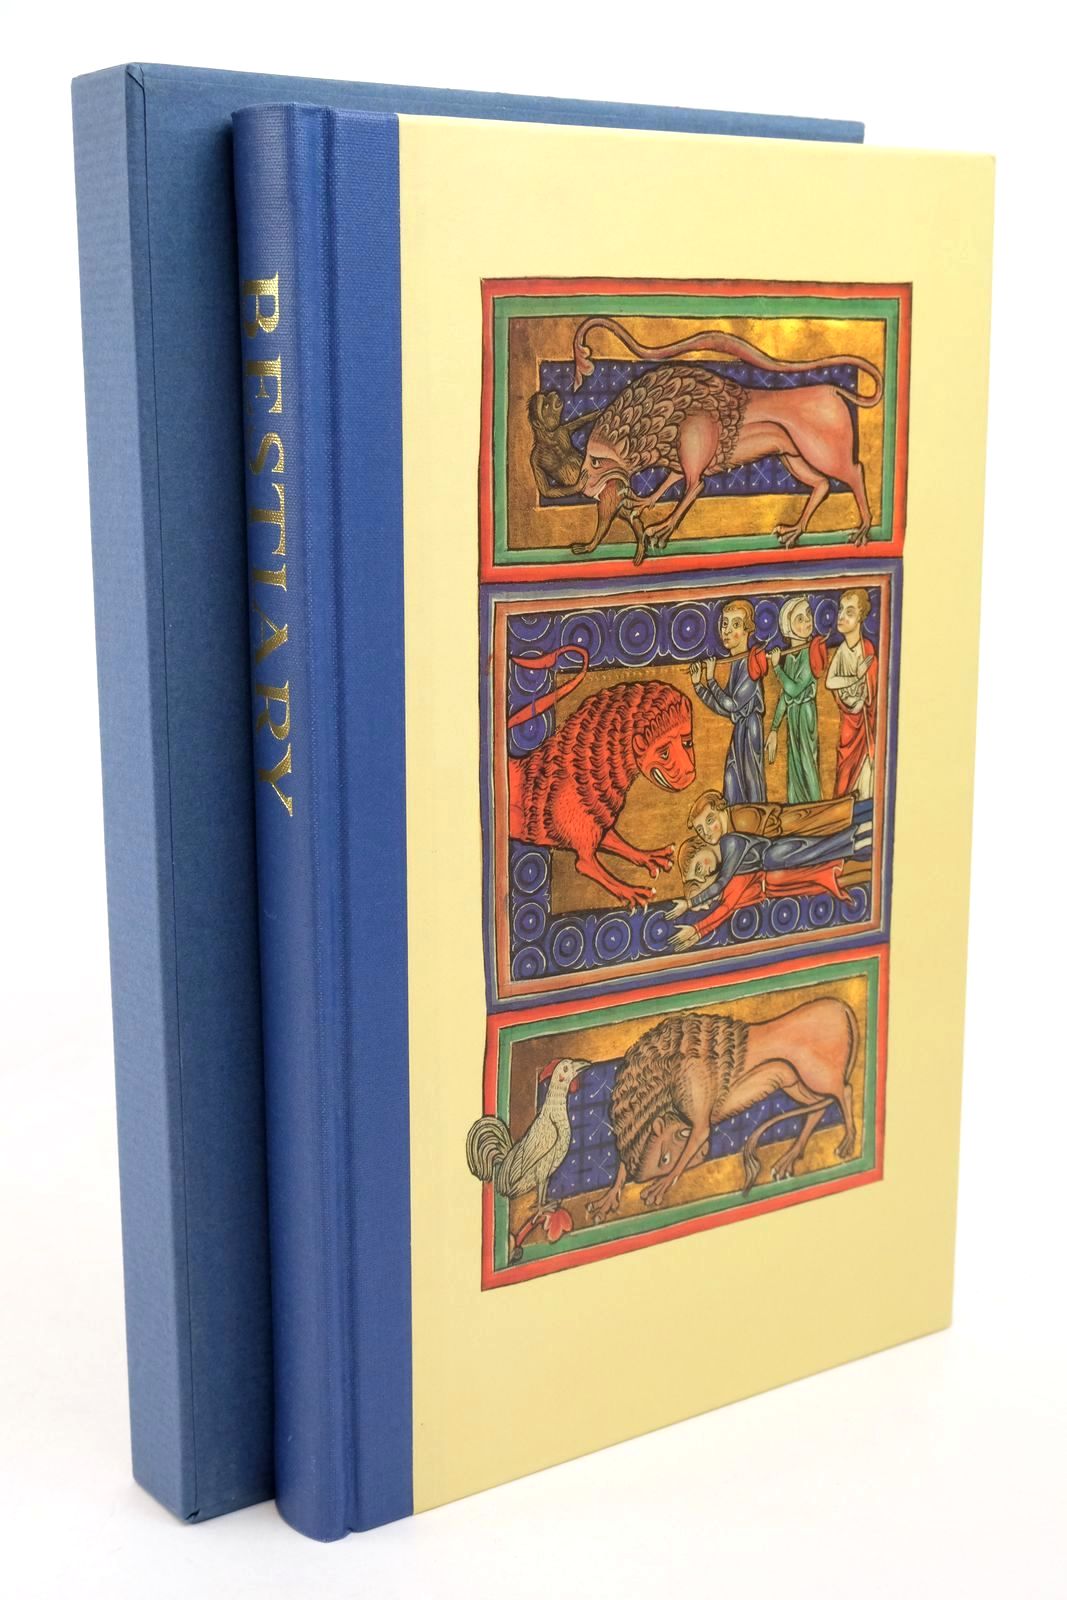 Photo of BESTIARY written by Barber, Richard published by Folio Society (STOCK CODE: 1322892)  for sale by Stella & Rose's Books